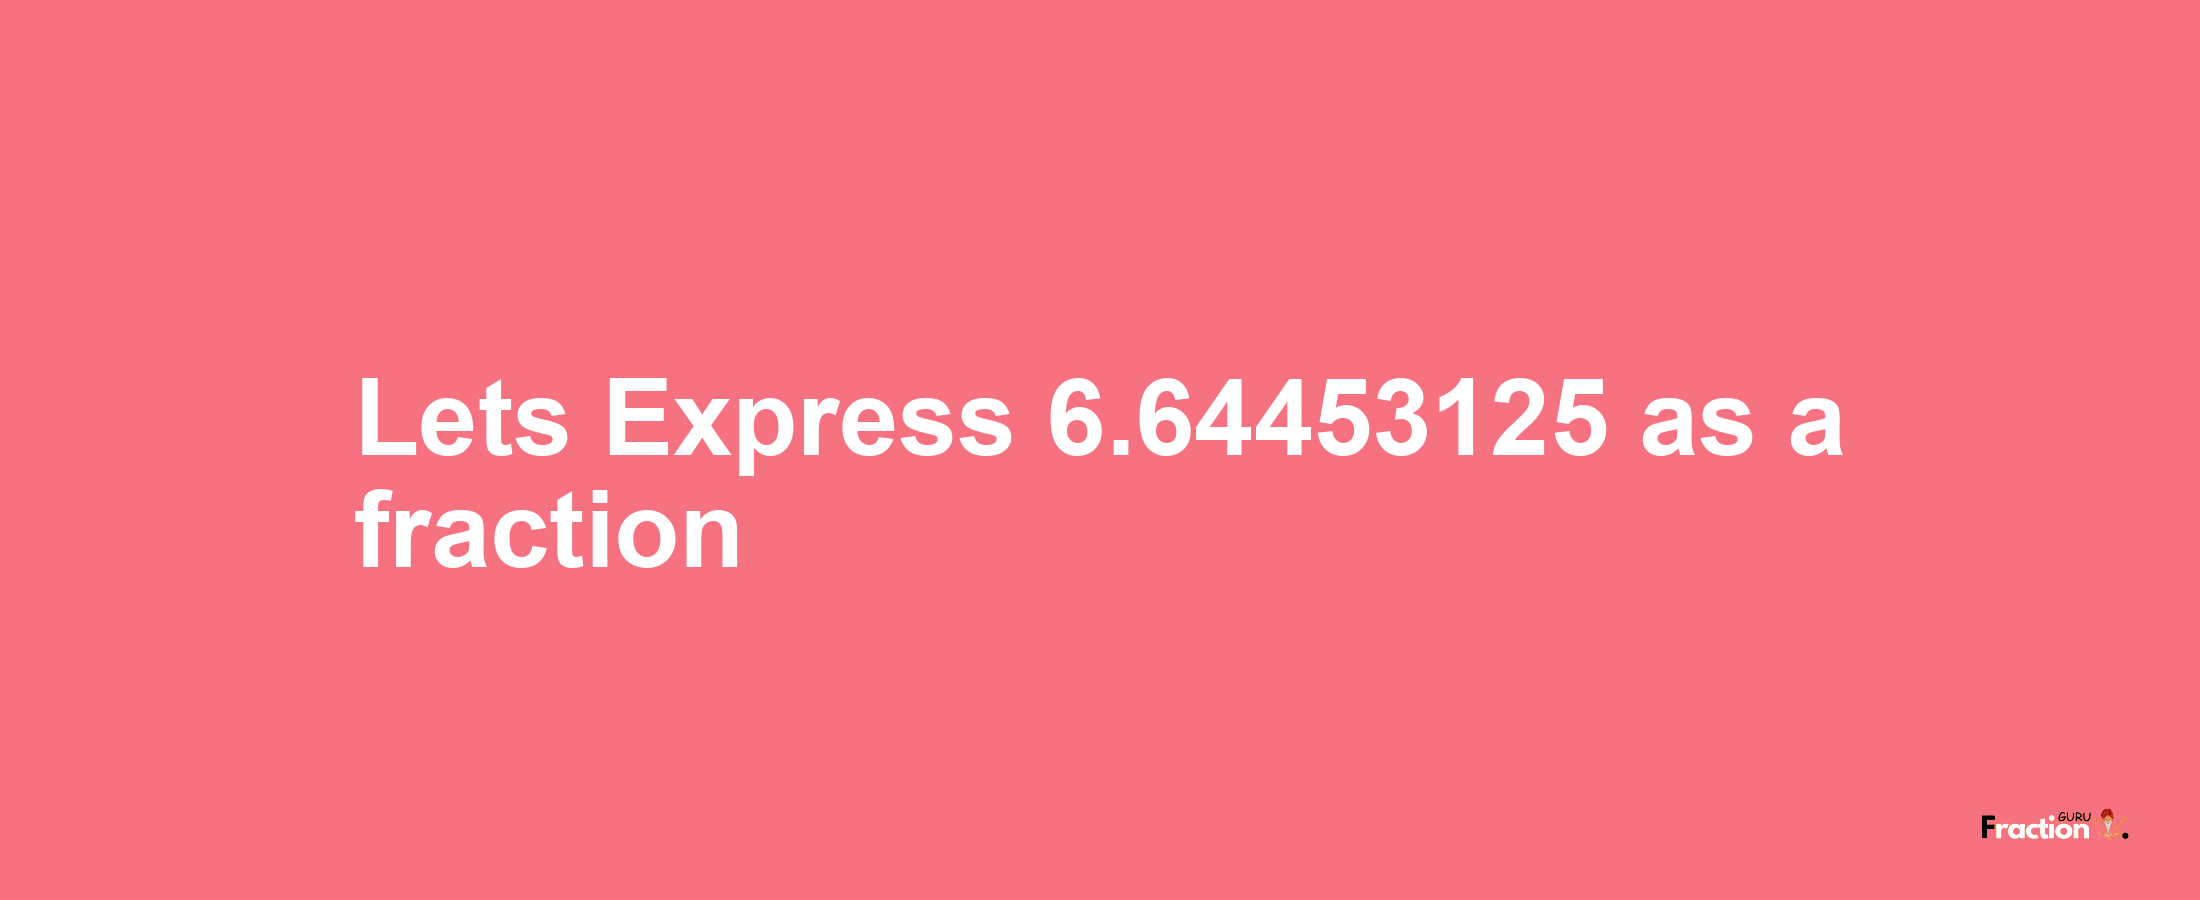 Lets Express 6.64453125 as afraction